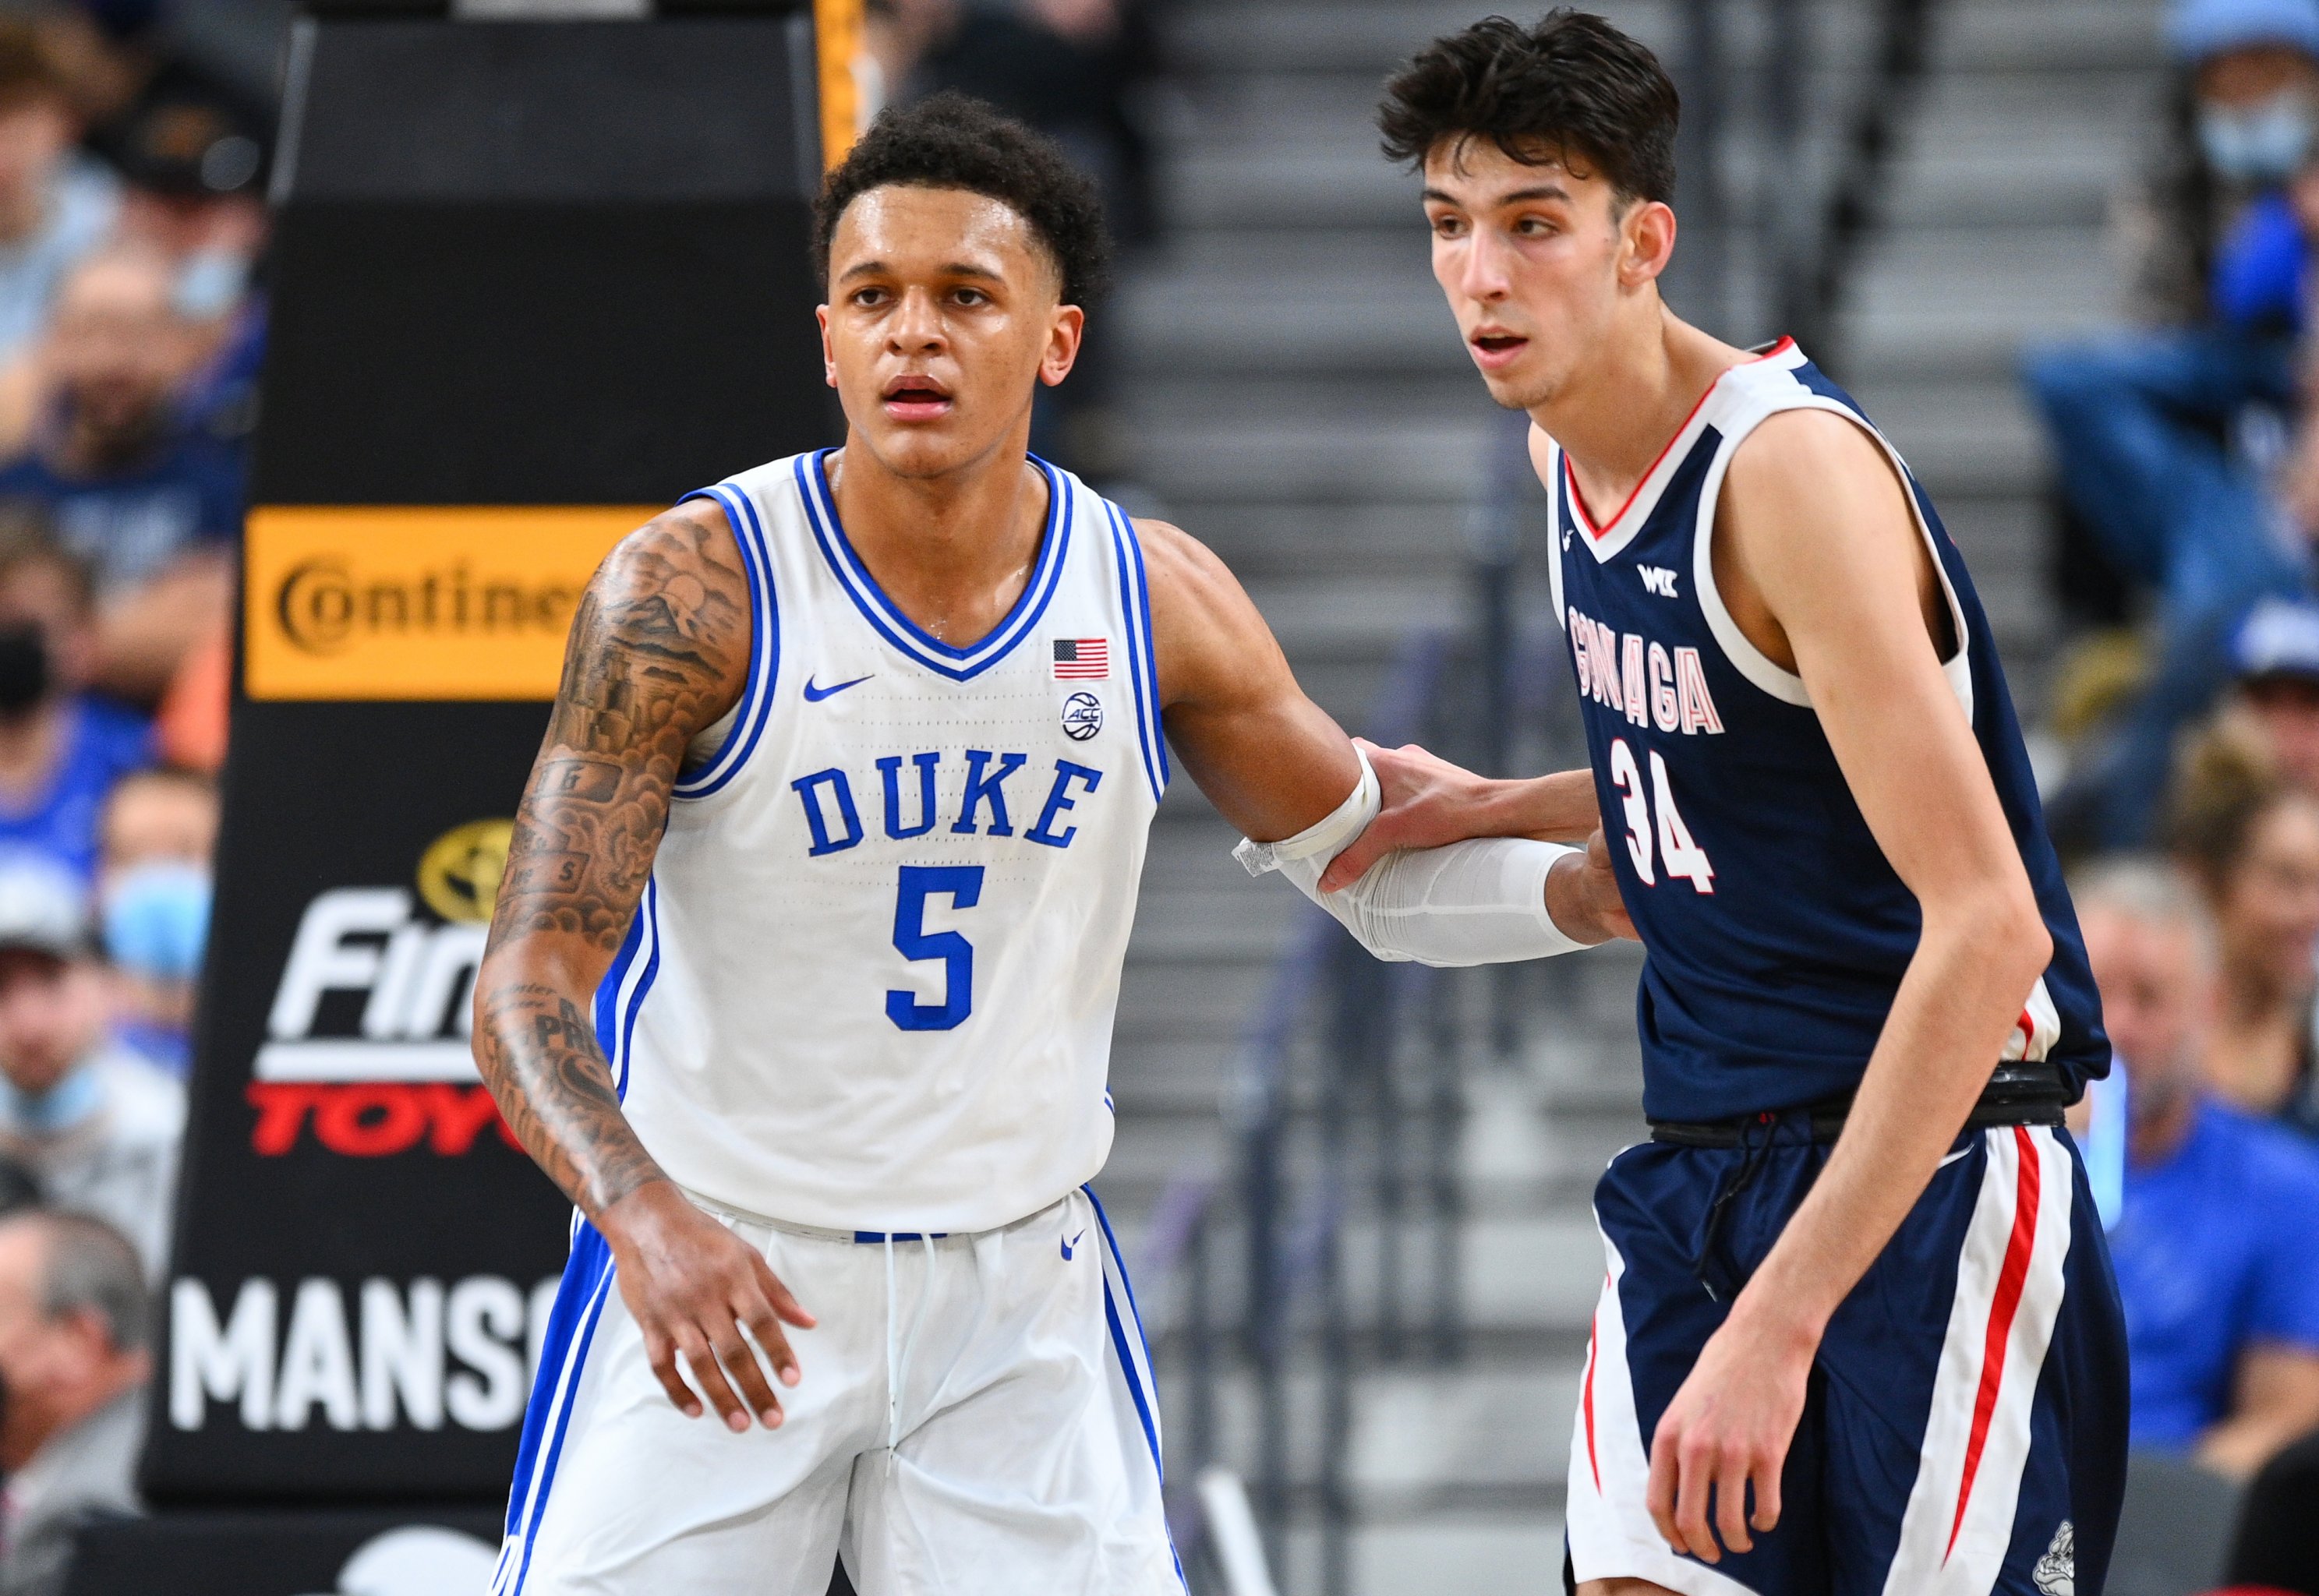 NBA mock draft 2022: Instant first round picks with lottery complete 